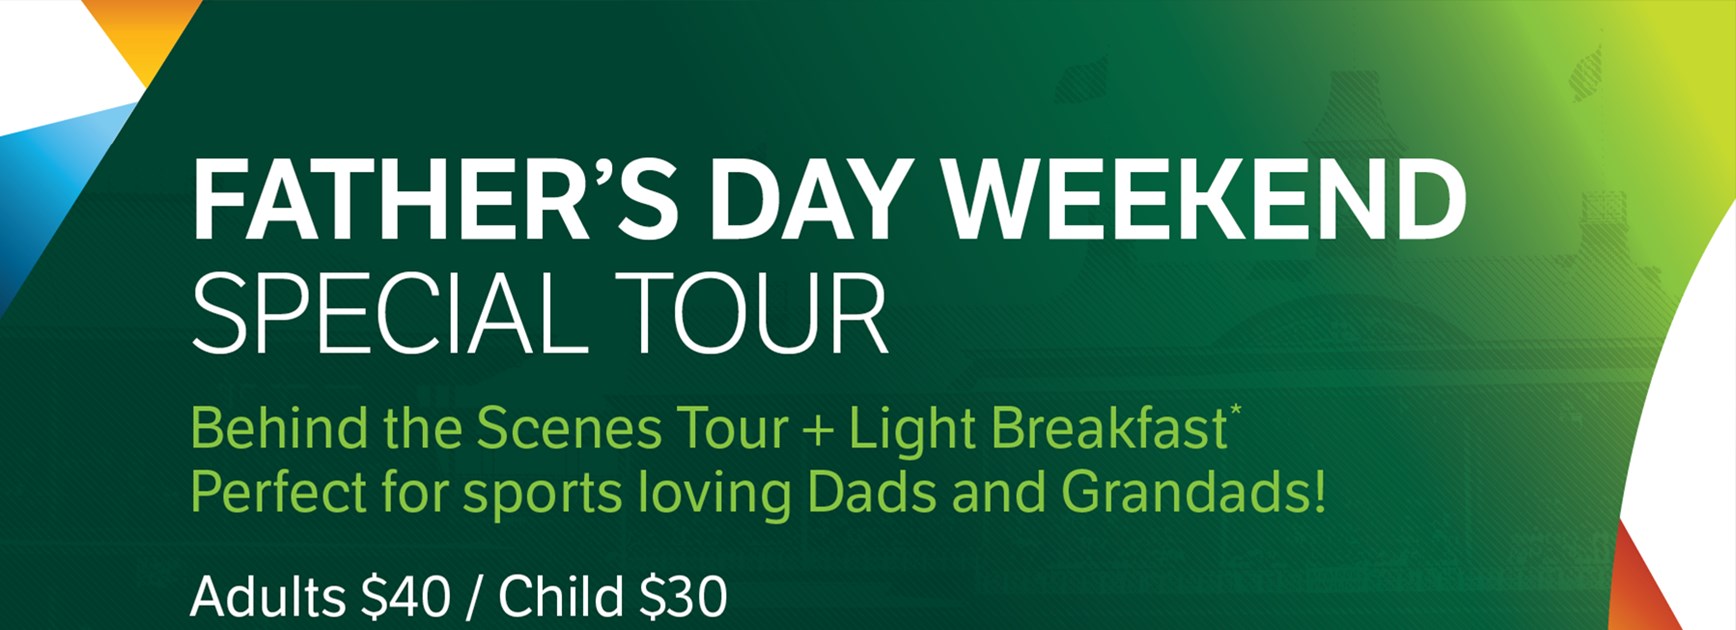 Fathers Day Weekend SCG Tour